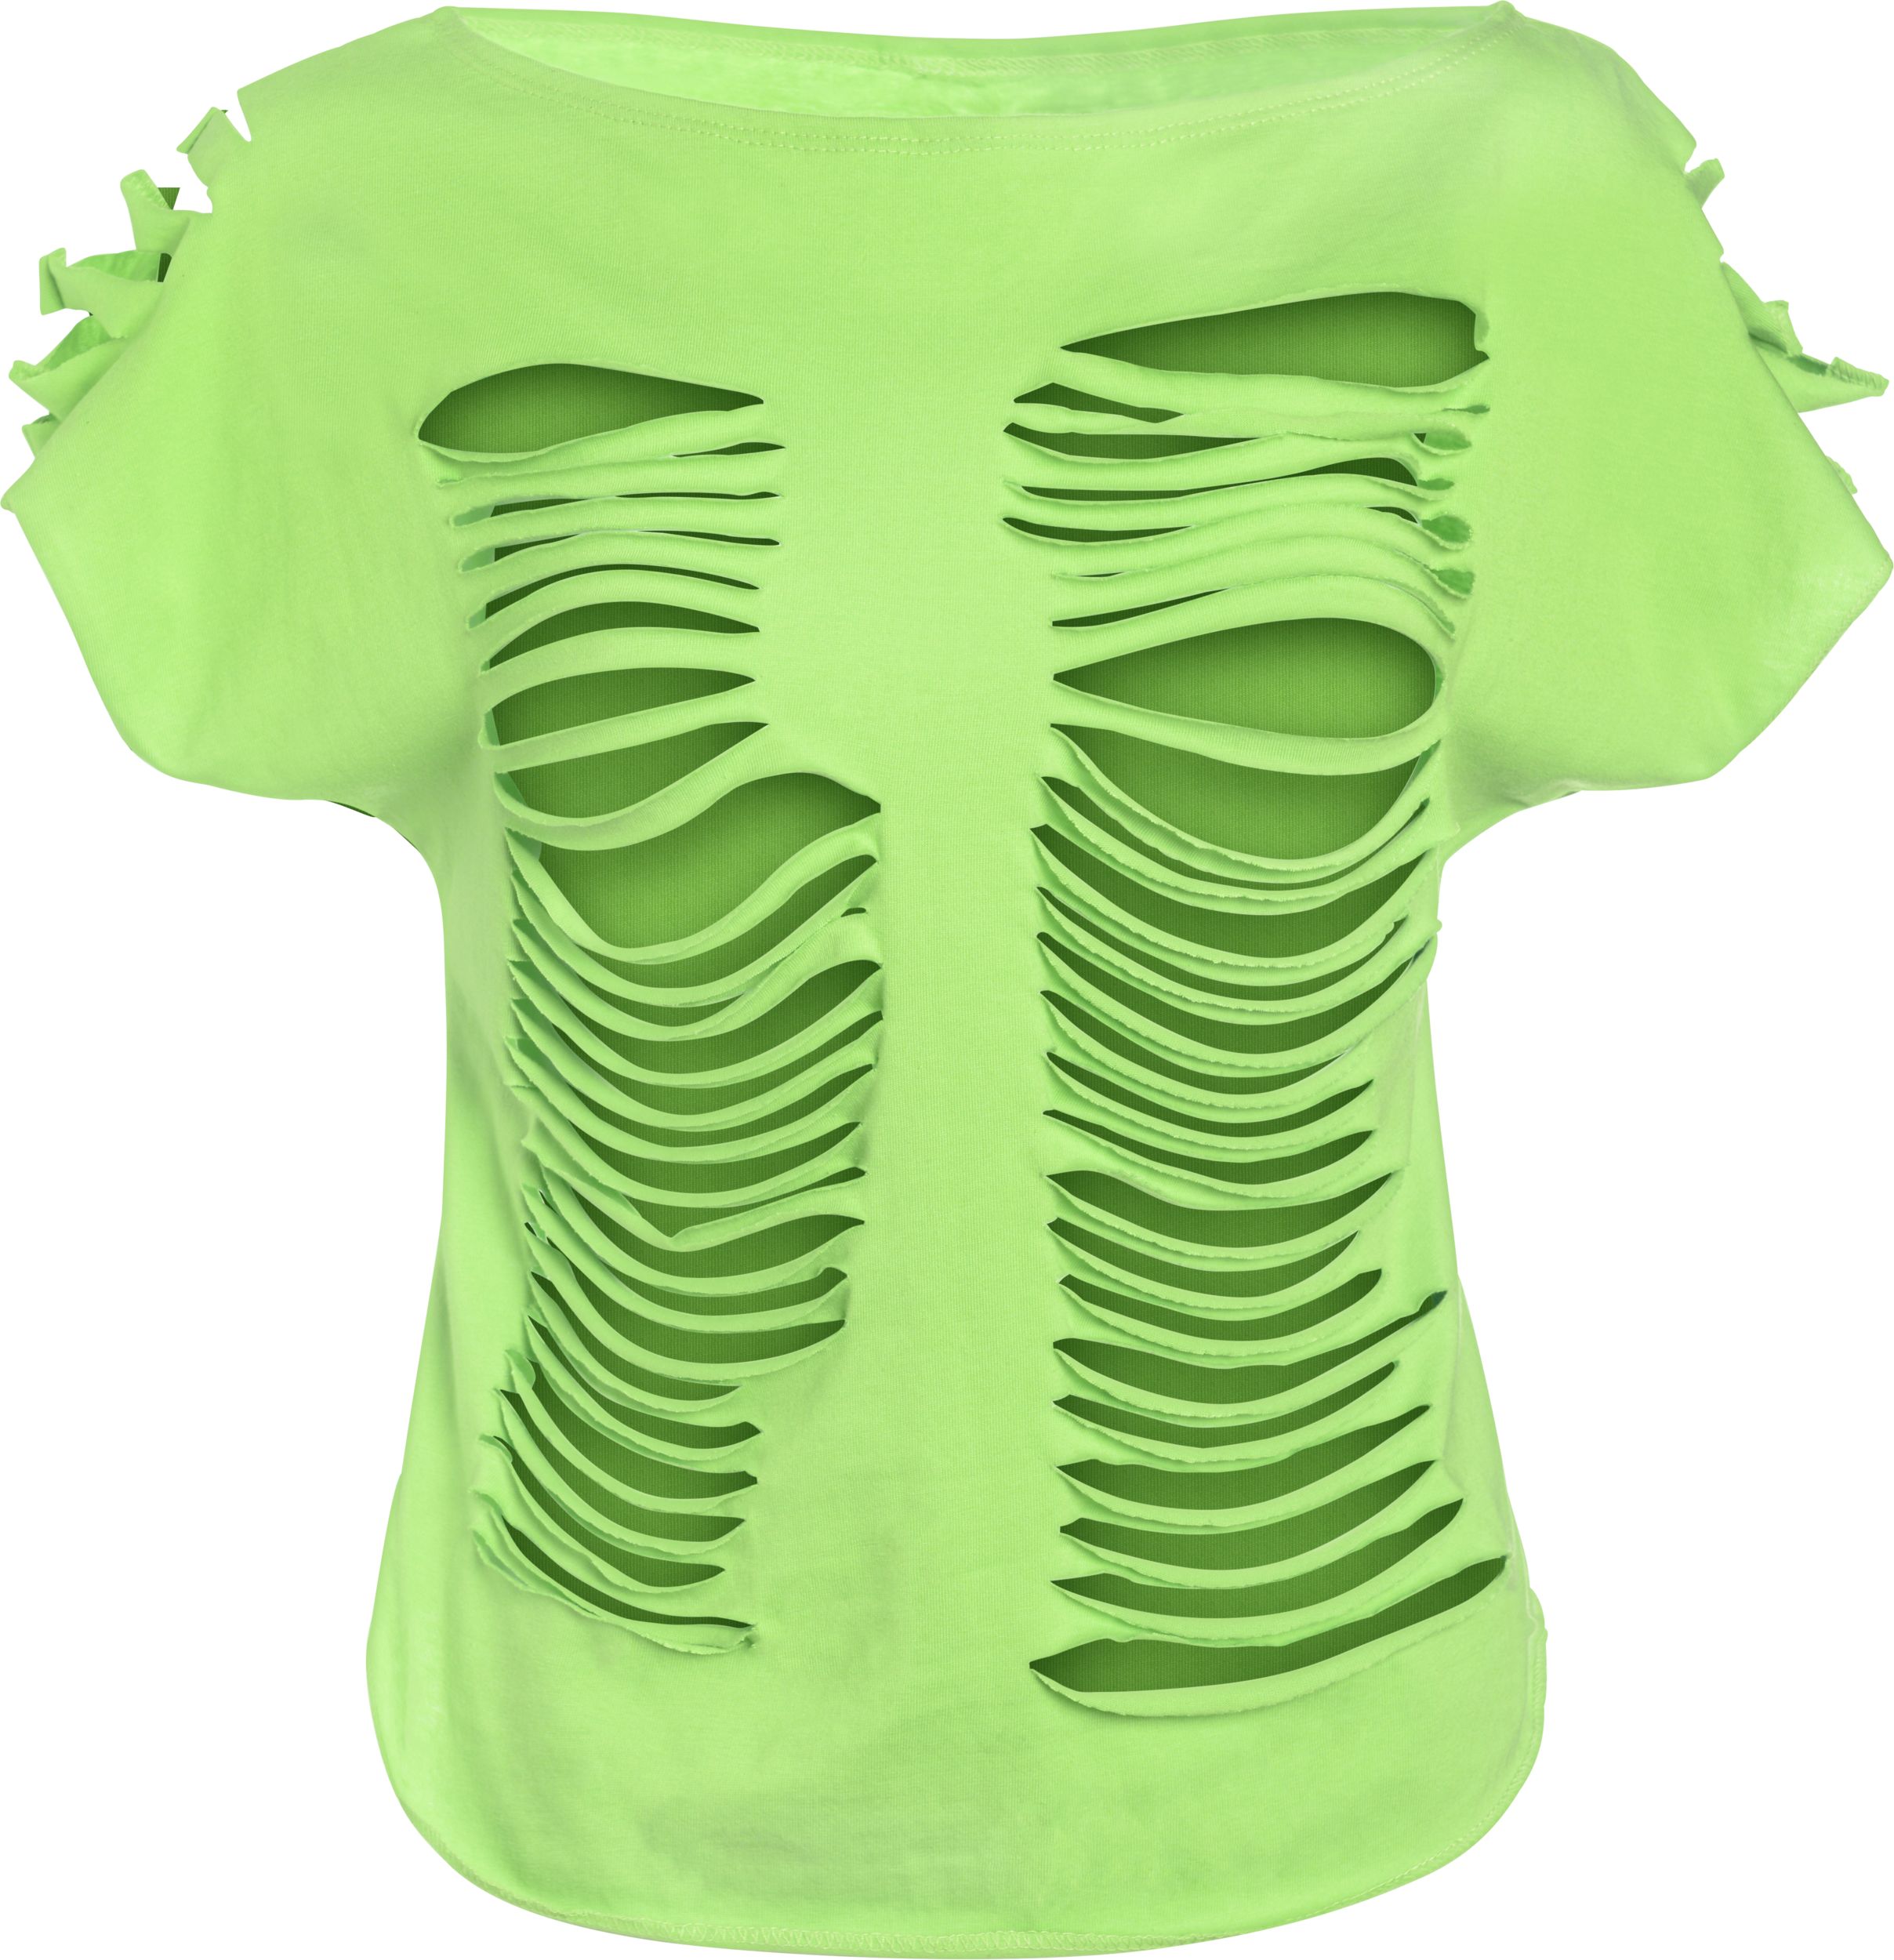 Adult 1980s Ripped T-Shirt, Neon Green, One Size, Wearable Costume